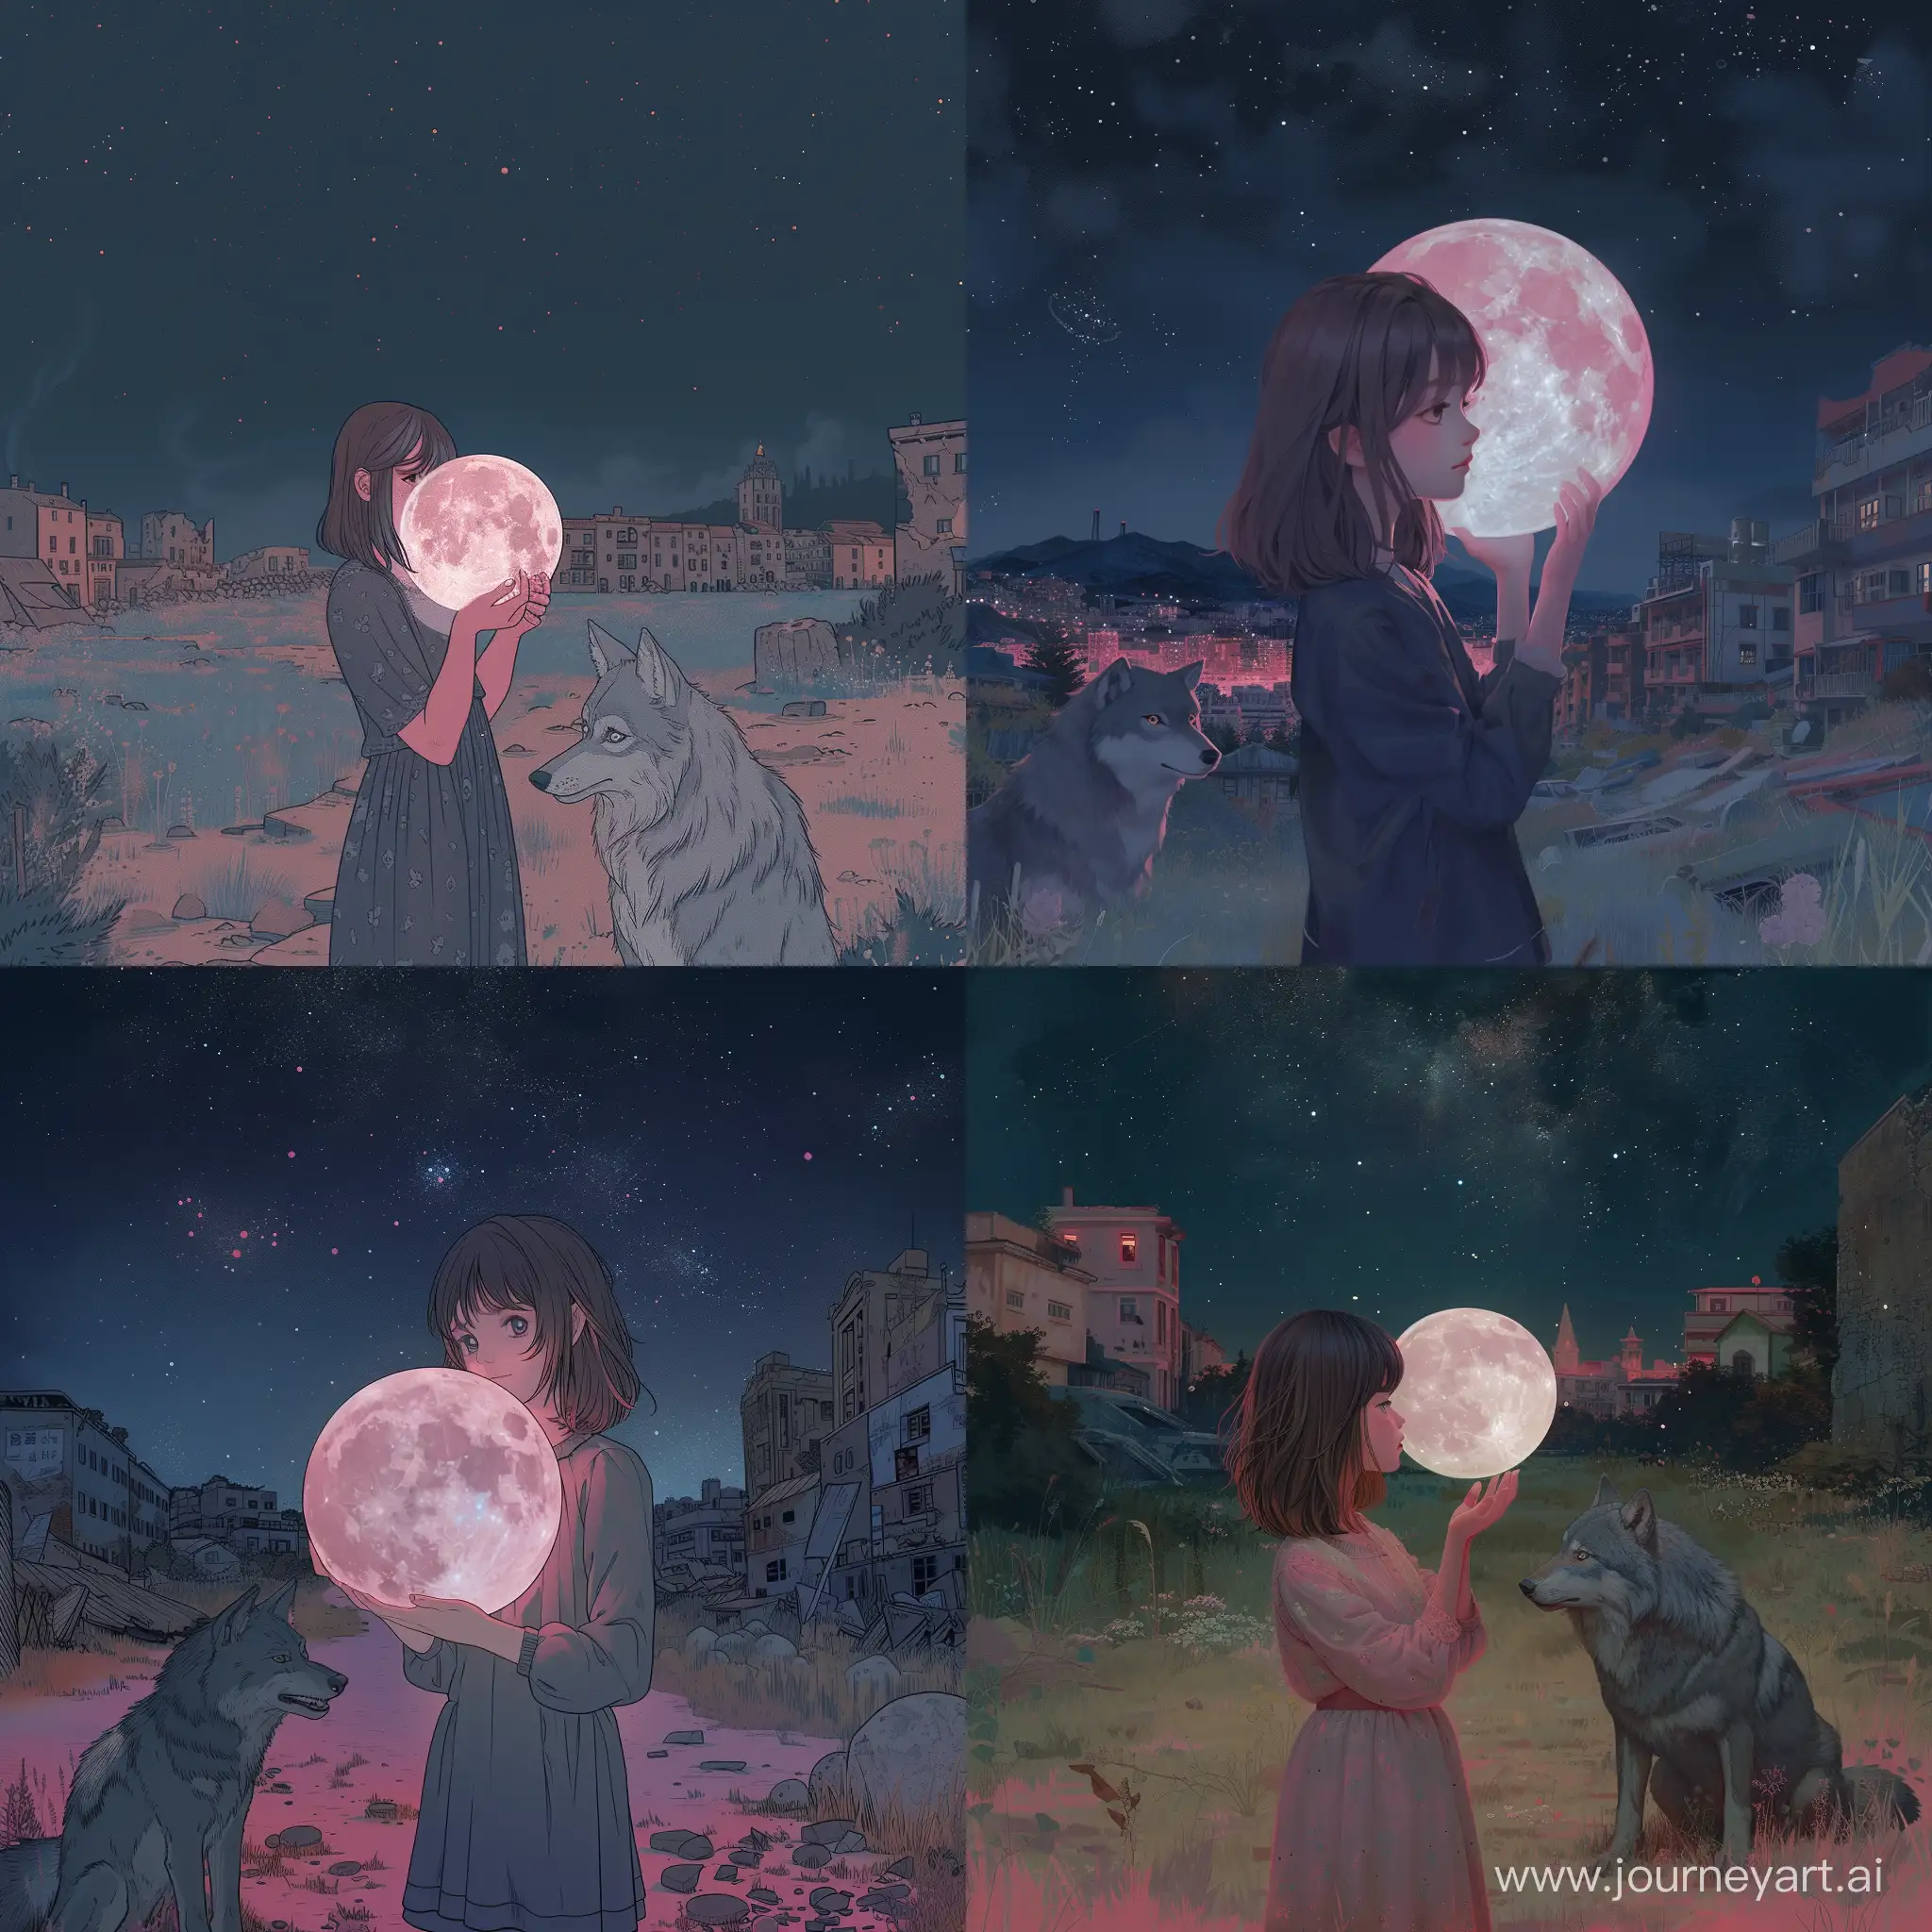 On a starry night, a city rises in the distance. To the right, urban decay and desolation reign, casting a shadow of neglect and ruin. To the left, vibrant and beautiful architecture stands proudly, a beacon of health and vitality, As the night descends, a young girl with shoulder-length brown hair stands with poise, cradling the moon in her delicate hands. She gazes at it serenely, a pale pink glow radiating softly from the milky white orb. At her side, a gray wolf looks up at the moon with wonder. The entire scene is bathed in a tranquil and enchanting soft pink hue, casting a calm and beautiful atmosphere over the surroundings. The dark sky looms above, while the field below is adorned with the gentle, pale pink light of the moon, creating a truly magical night --q 4